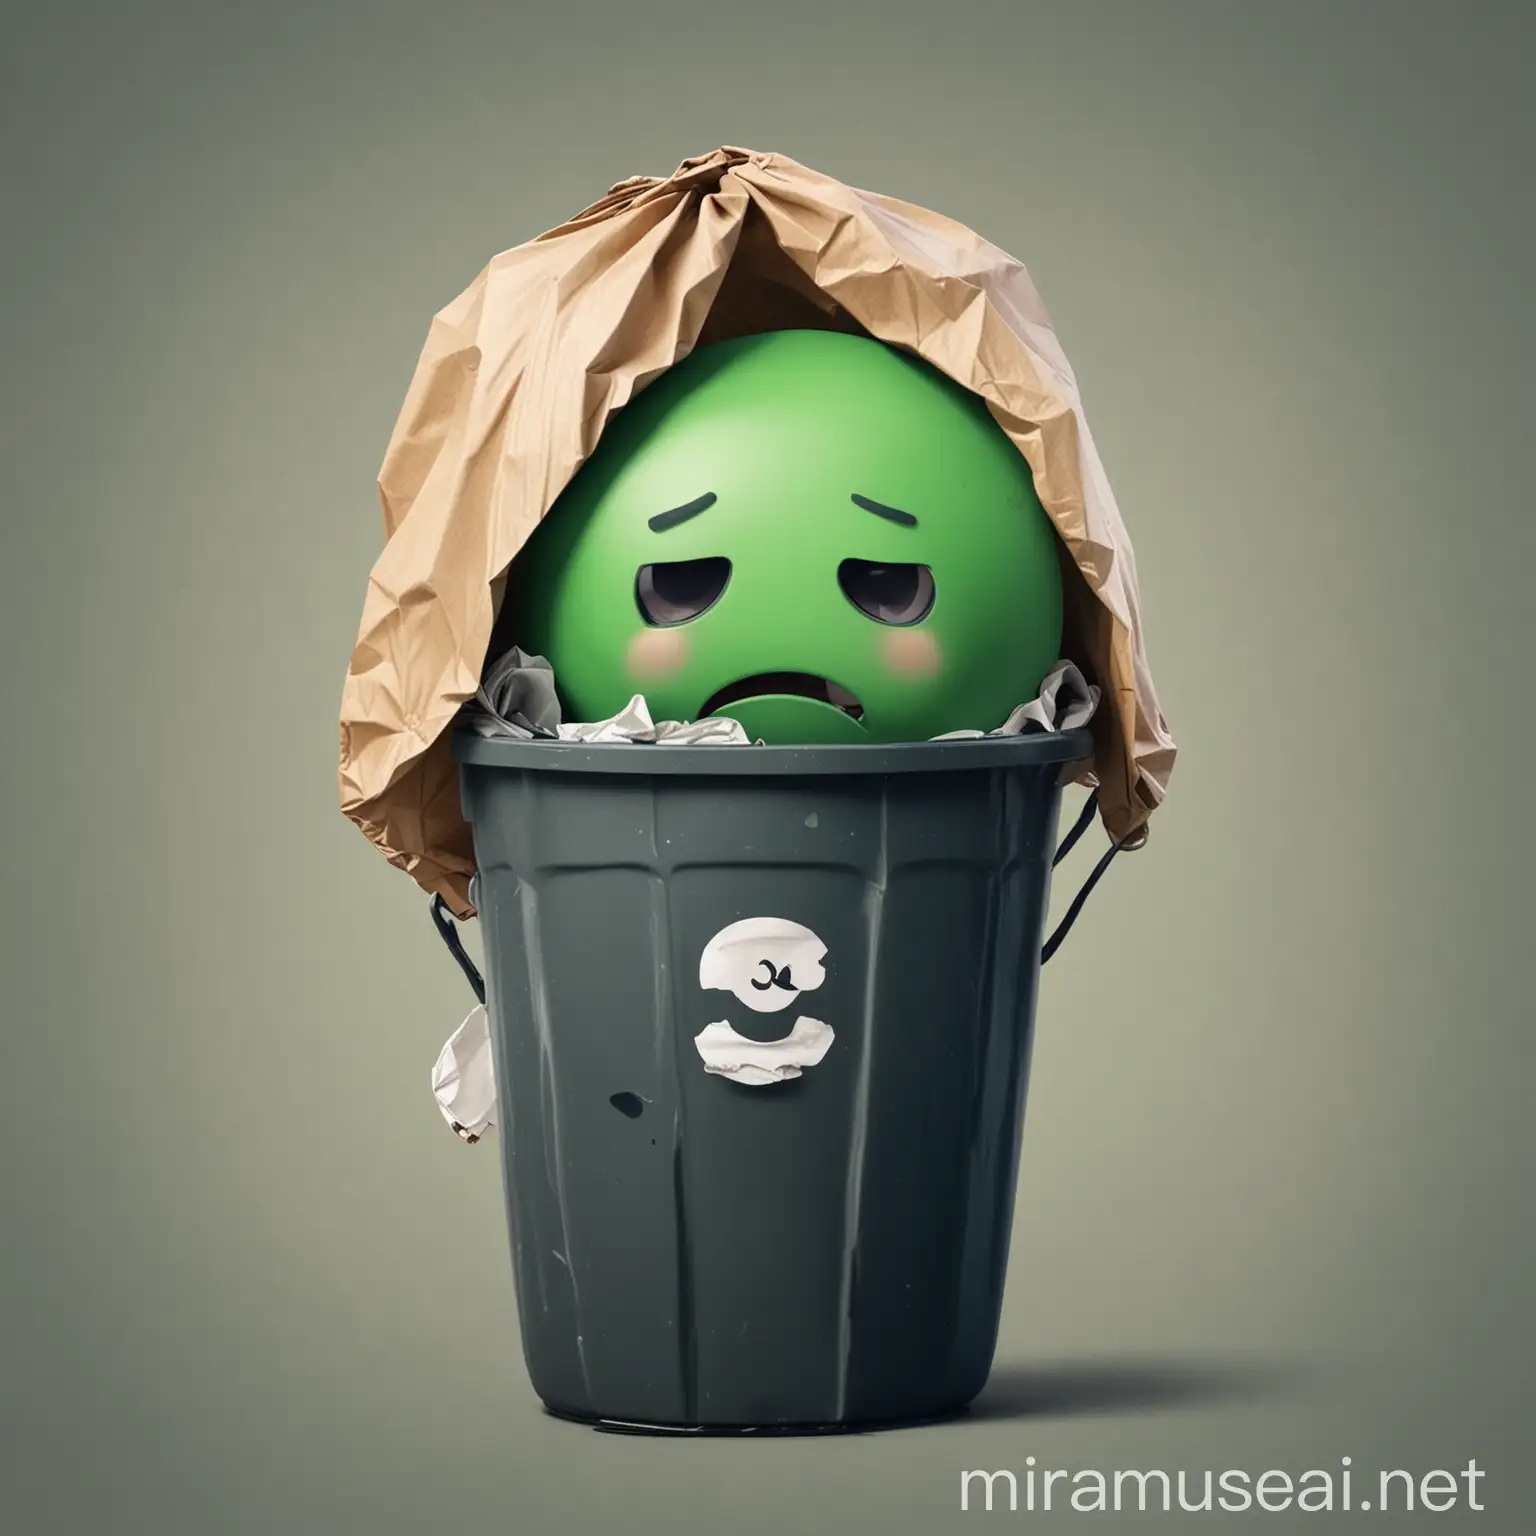 A WhatsApp icon with a sad face and throwing himself into a trash can with a bag or a bag on his shoulder